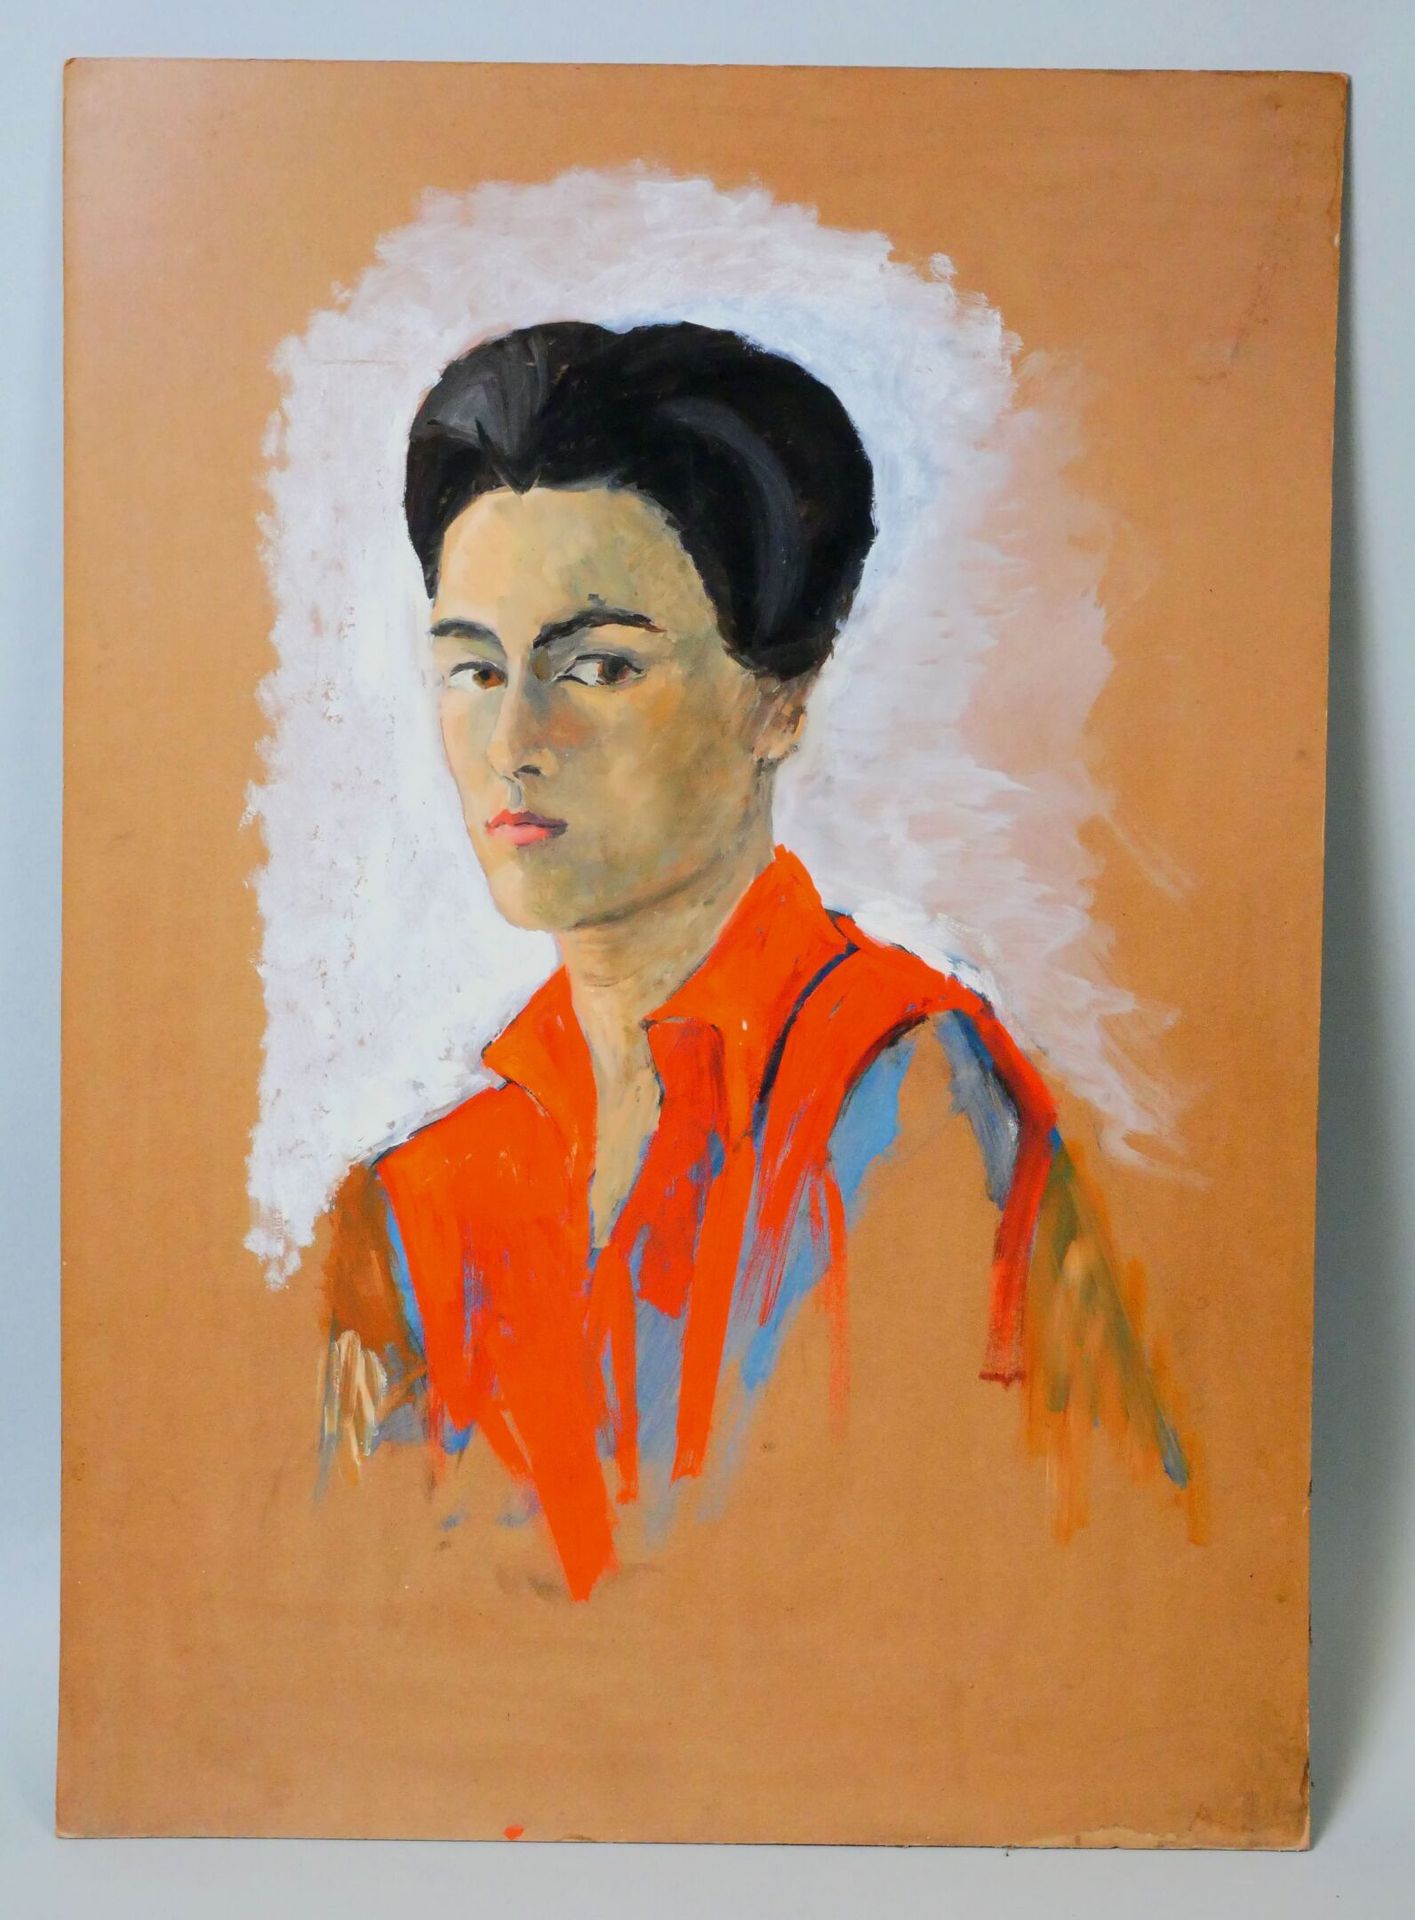 Null Nicole MARETTE (1931-2021)
Self-portrait with a red shirt
Oil on cardboard,&hellip;